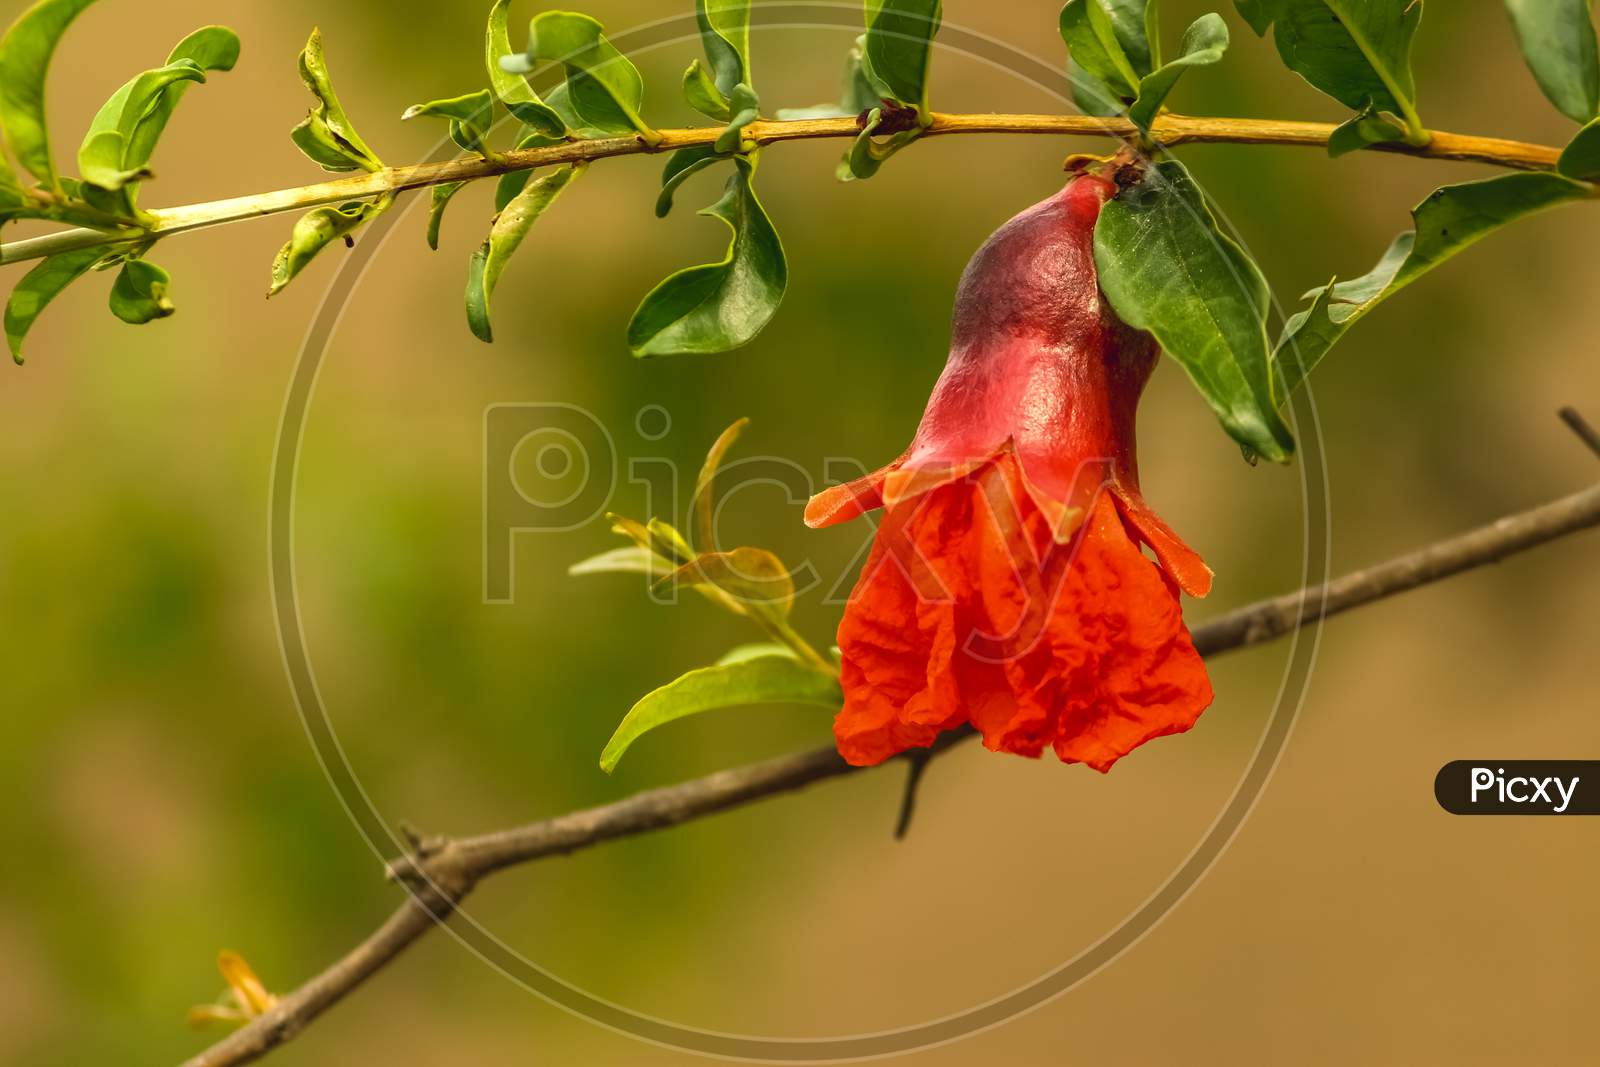 Red Pomegranate Flowers And Its Green Leafs On Pomegranate Framing Garden. Pomegranate Trees Are Self-Fruitful.Which Means The Flowers On The Pomegranate Are Both Male And Female.